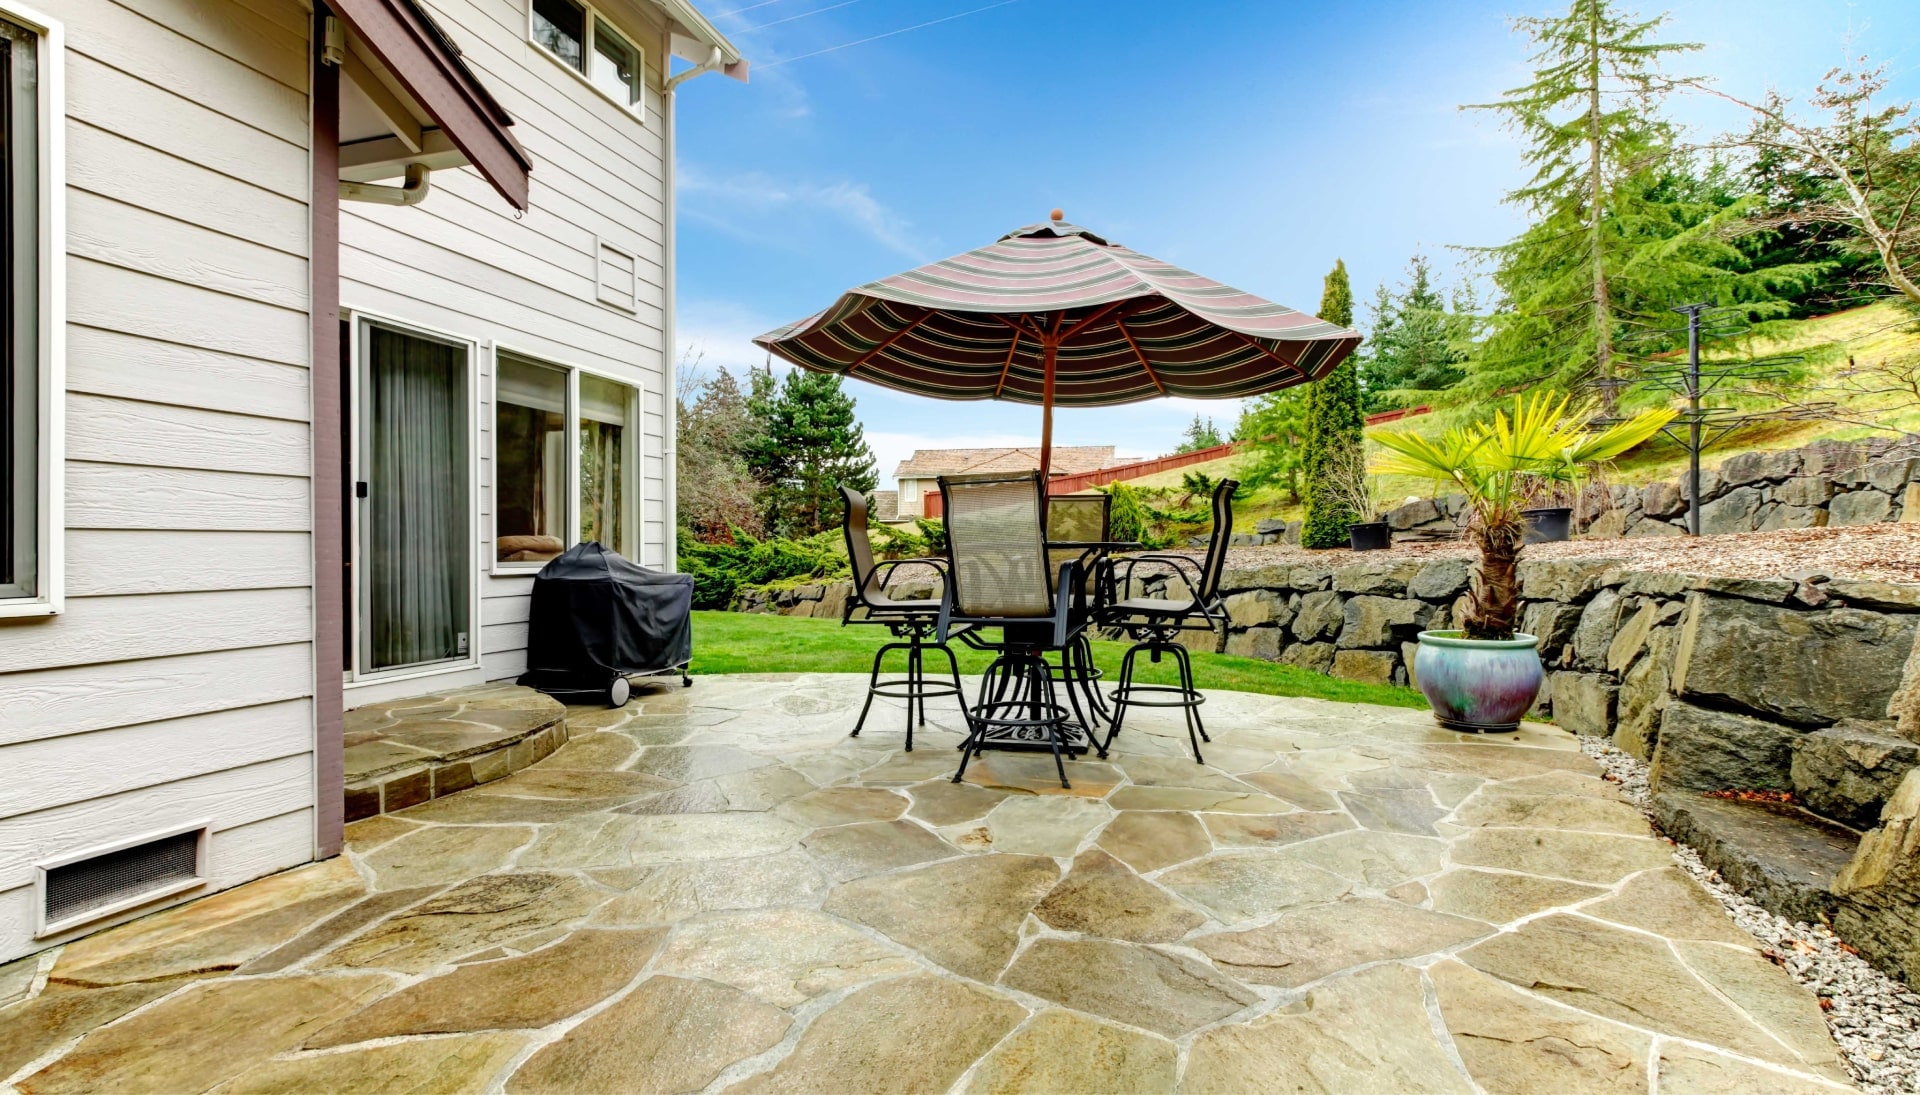 Create an Outdoor Oasis with Stunning Concrete Patio in Canton, OH - Enjoy Beautifully Textured and Patterned Concrete Surfaces for Your Entertaining and Relaxation Needs.